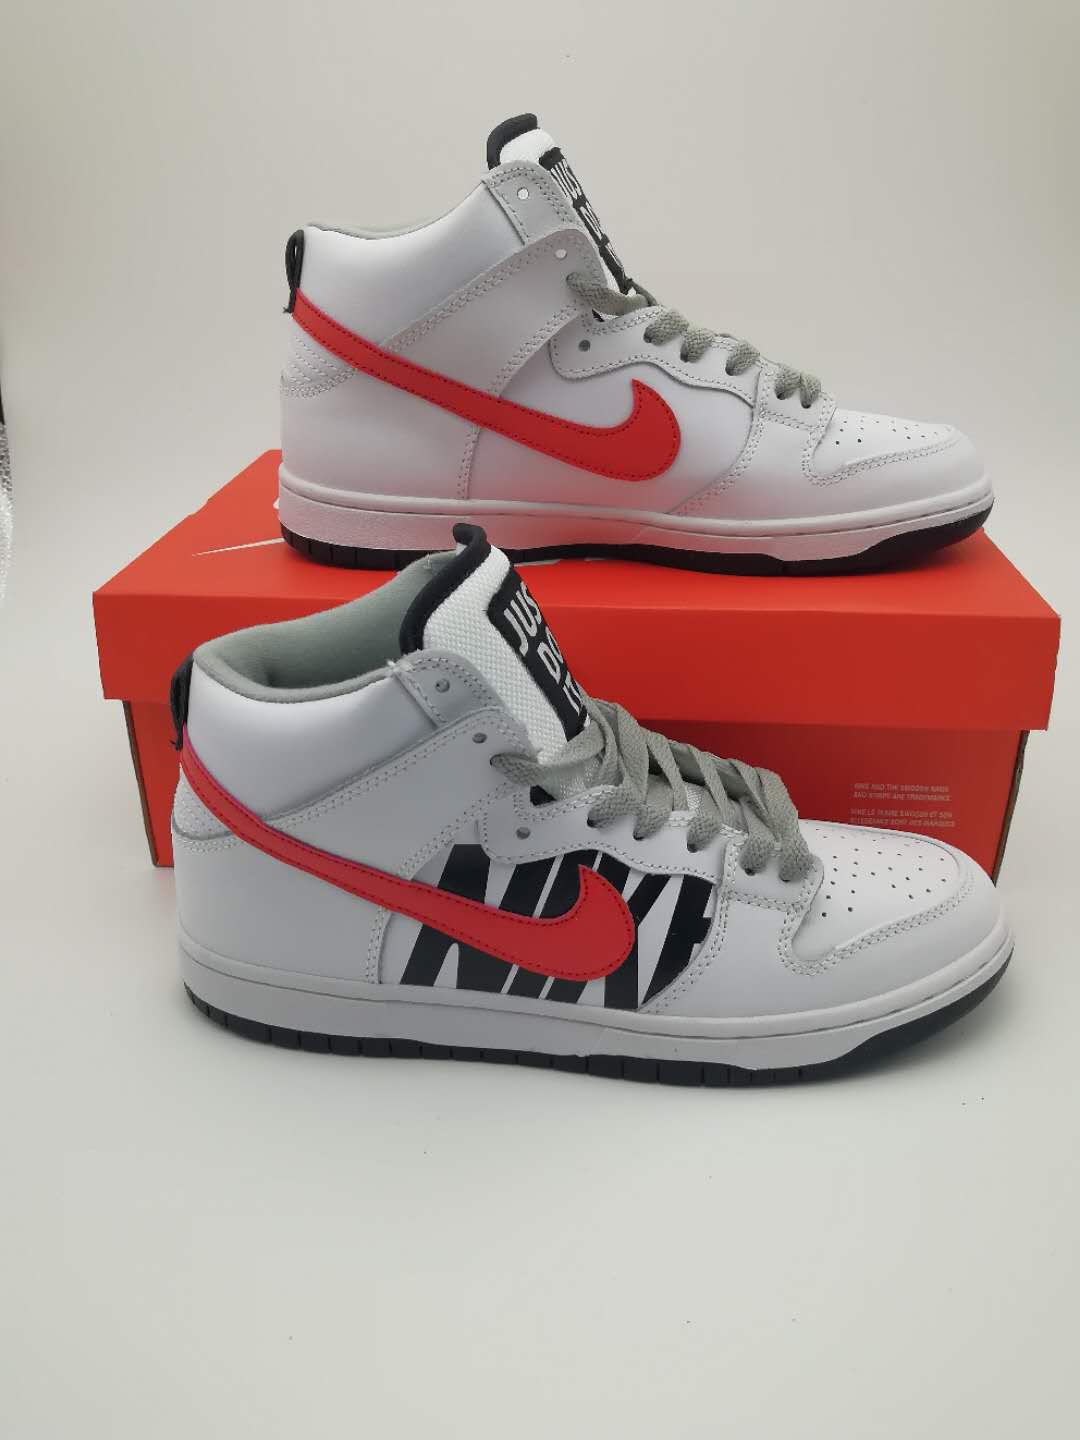 UNDFTD x Nike Dunk Lux White Black Red Shoes